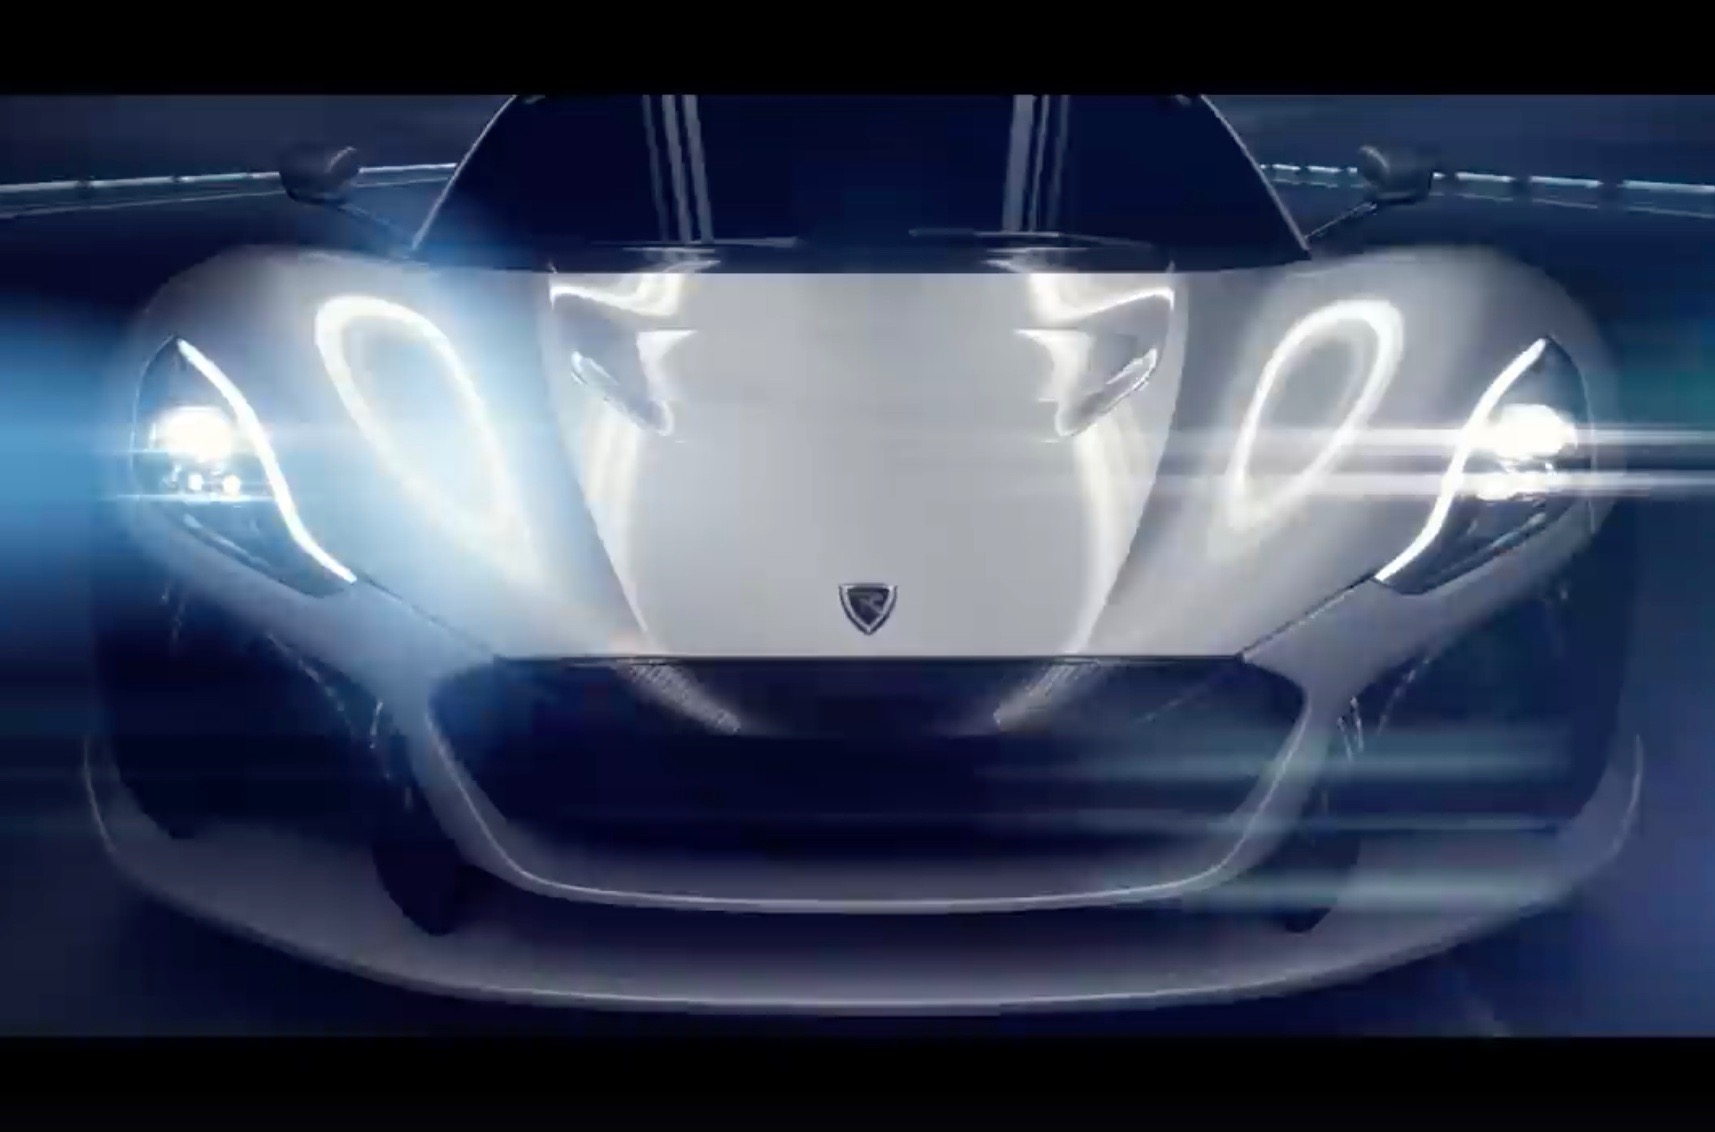 New Rimac hypercar previewed, set to be world’s quickest car (video)